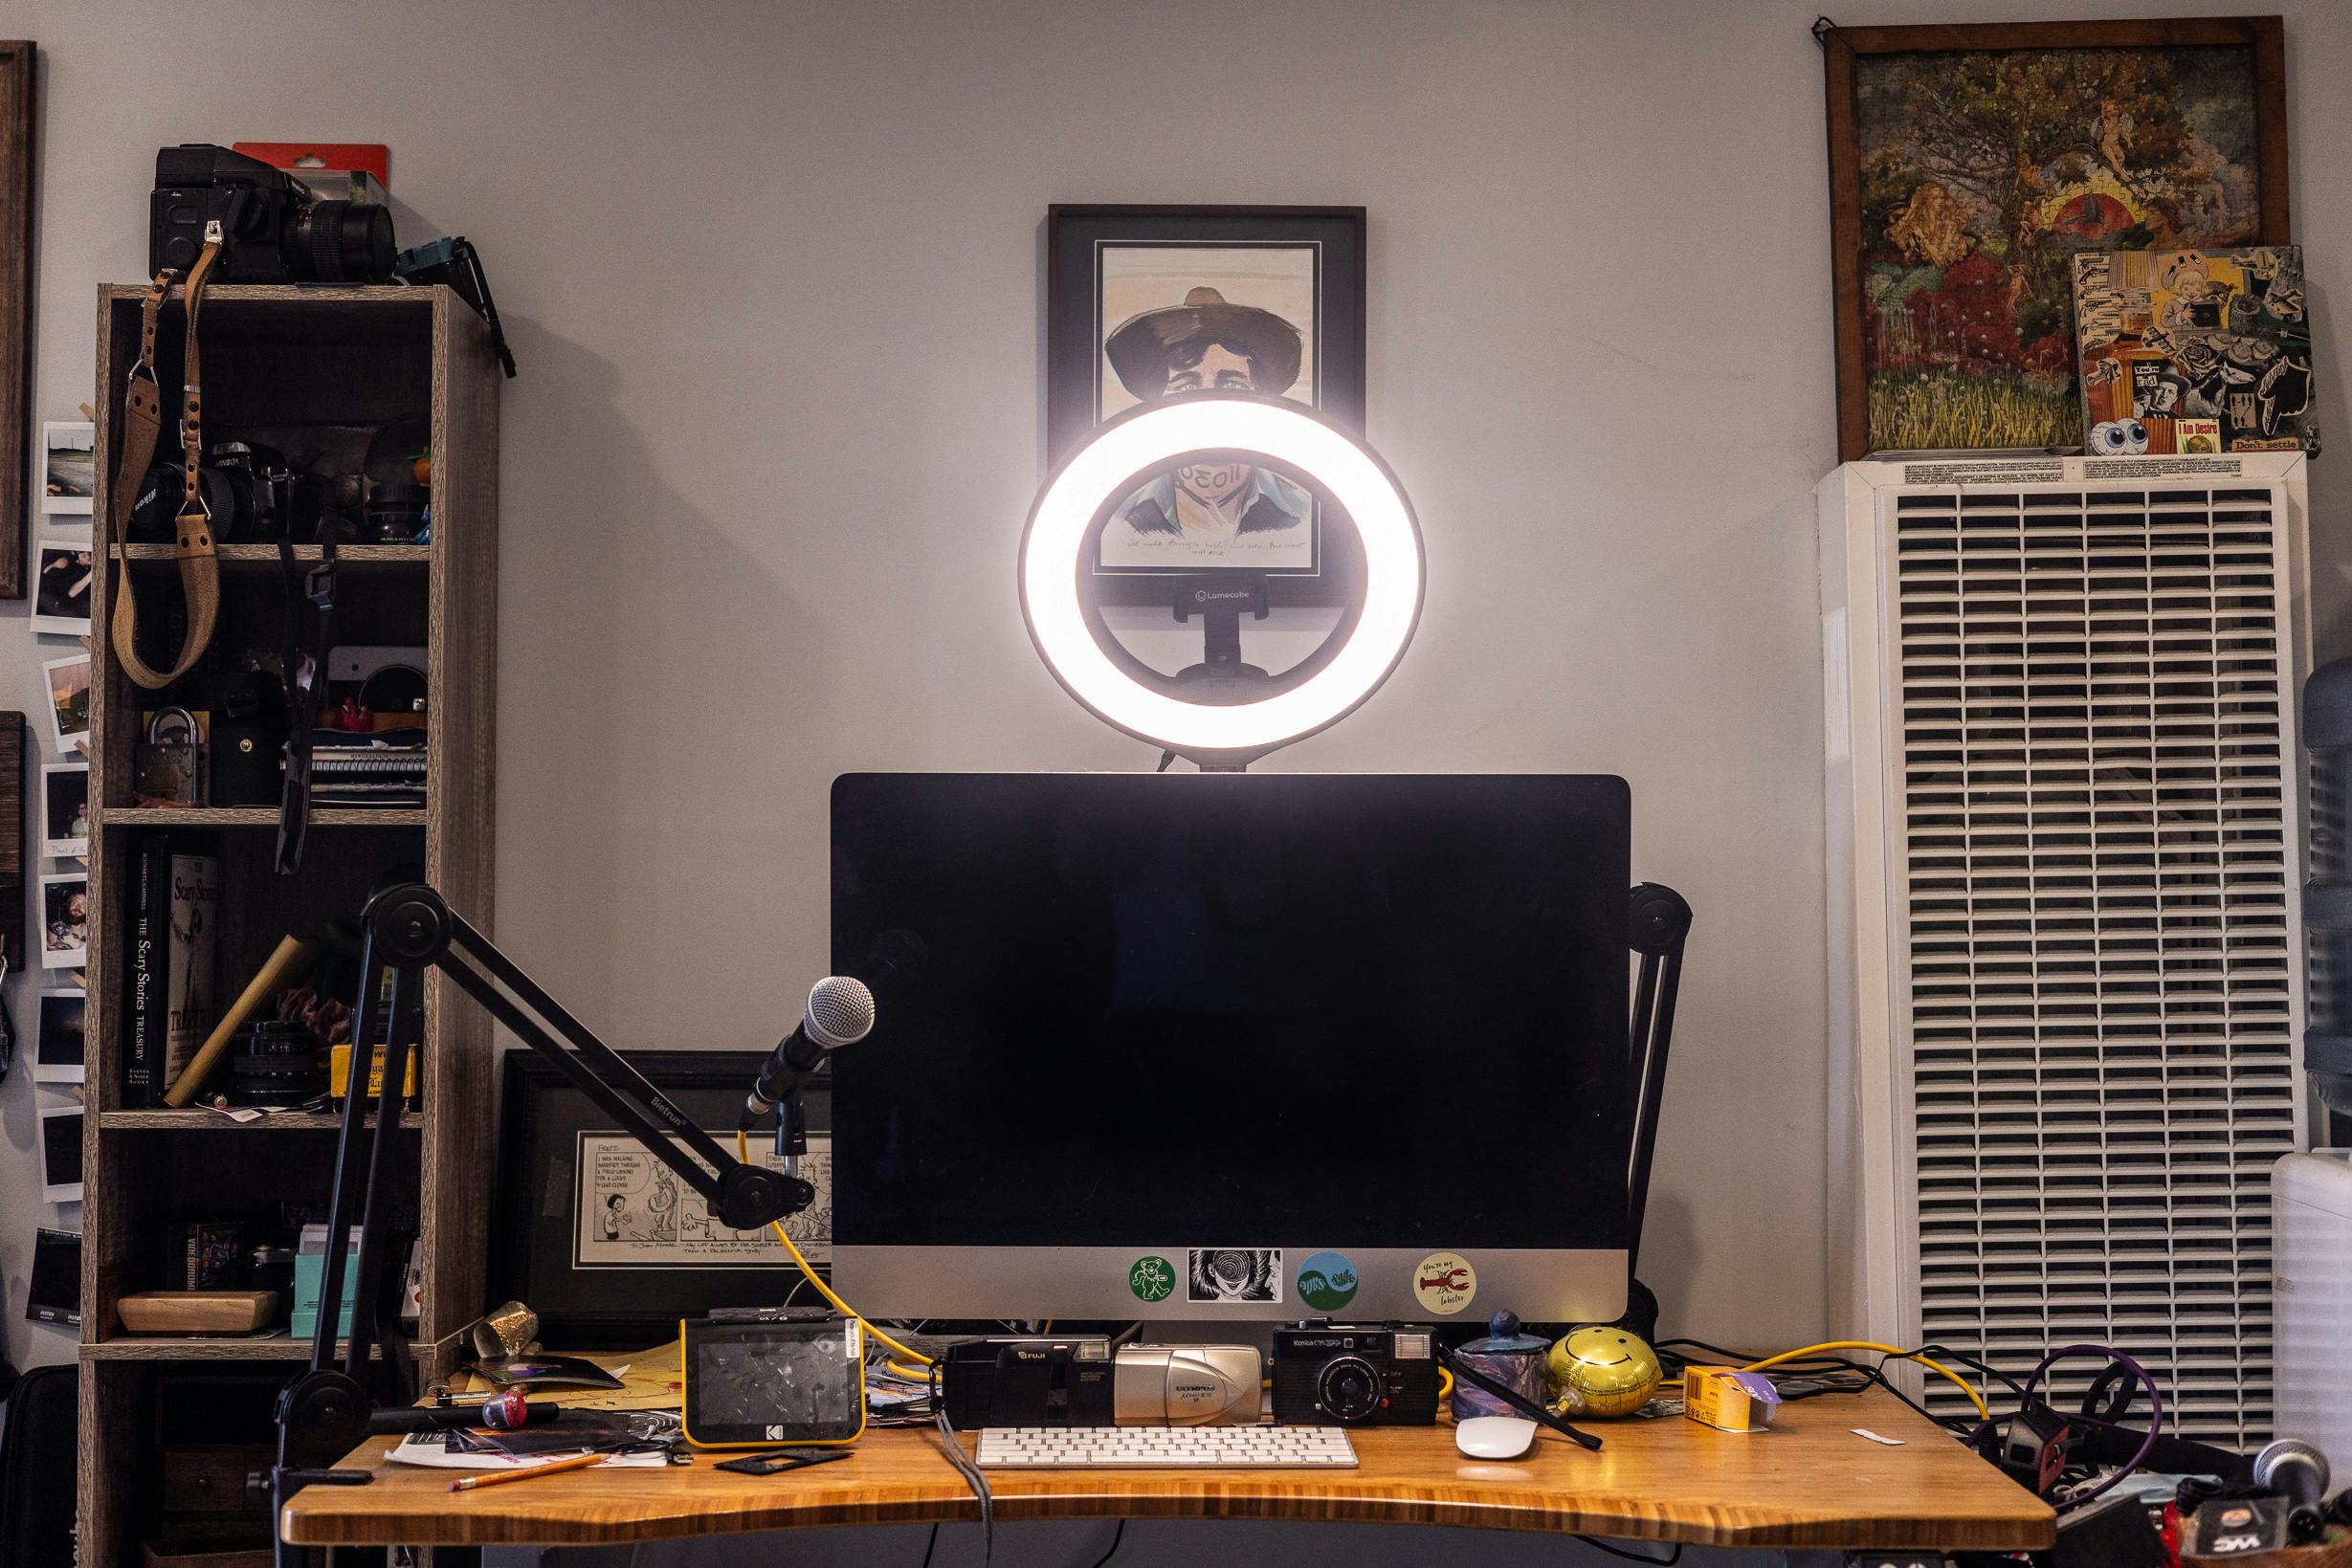 a lume cube ring light mini mounted above a desk with a iMac on it.